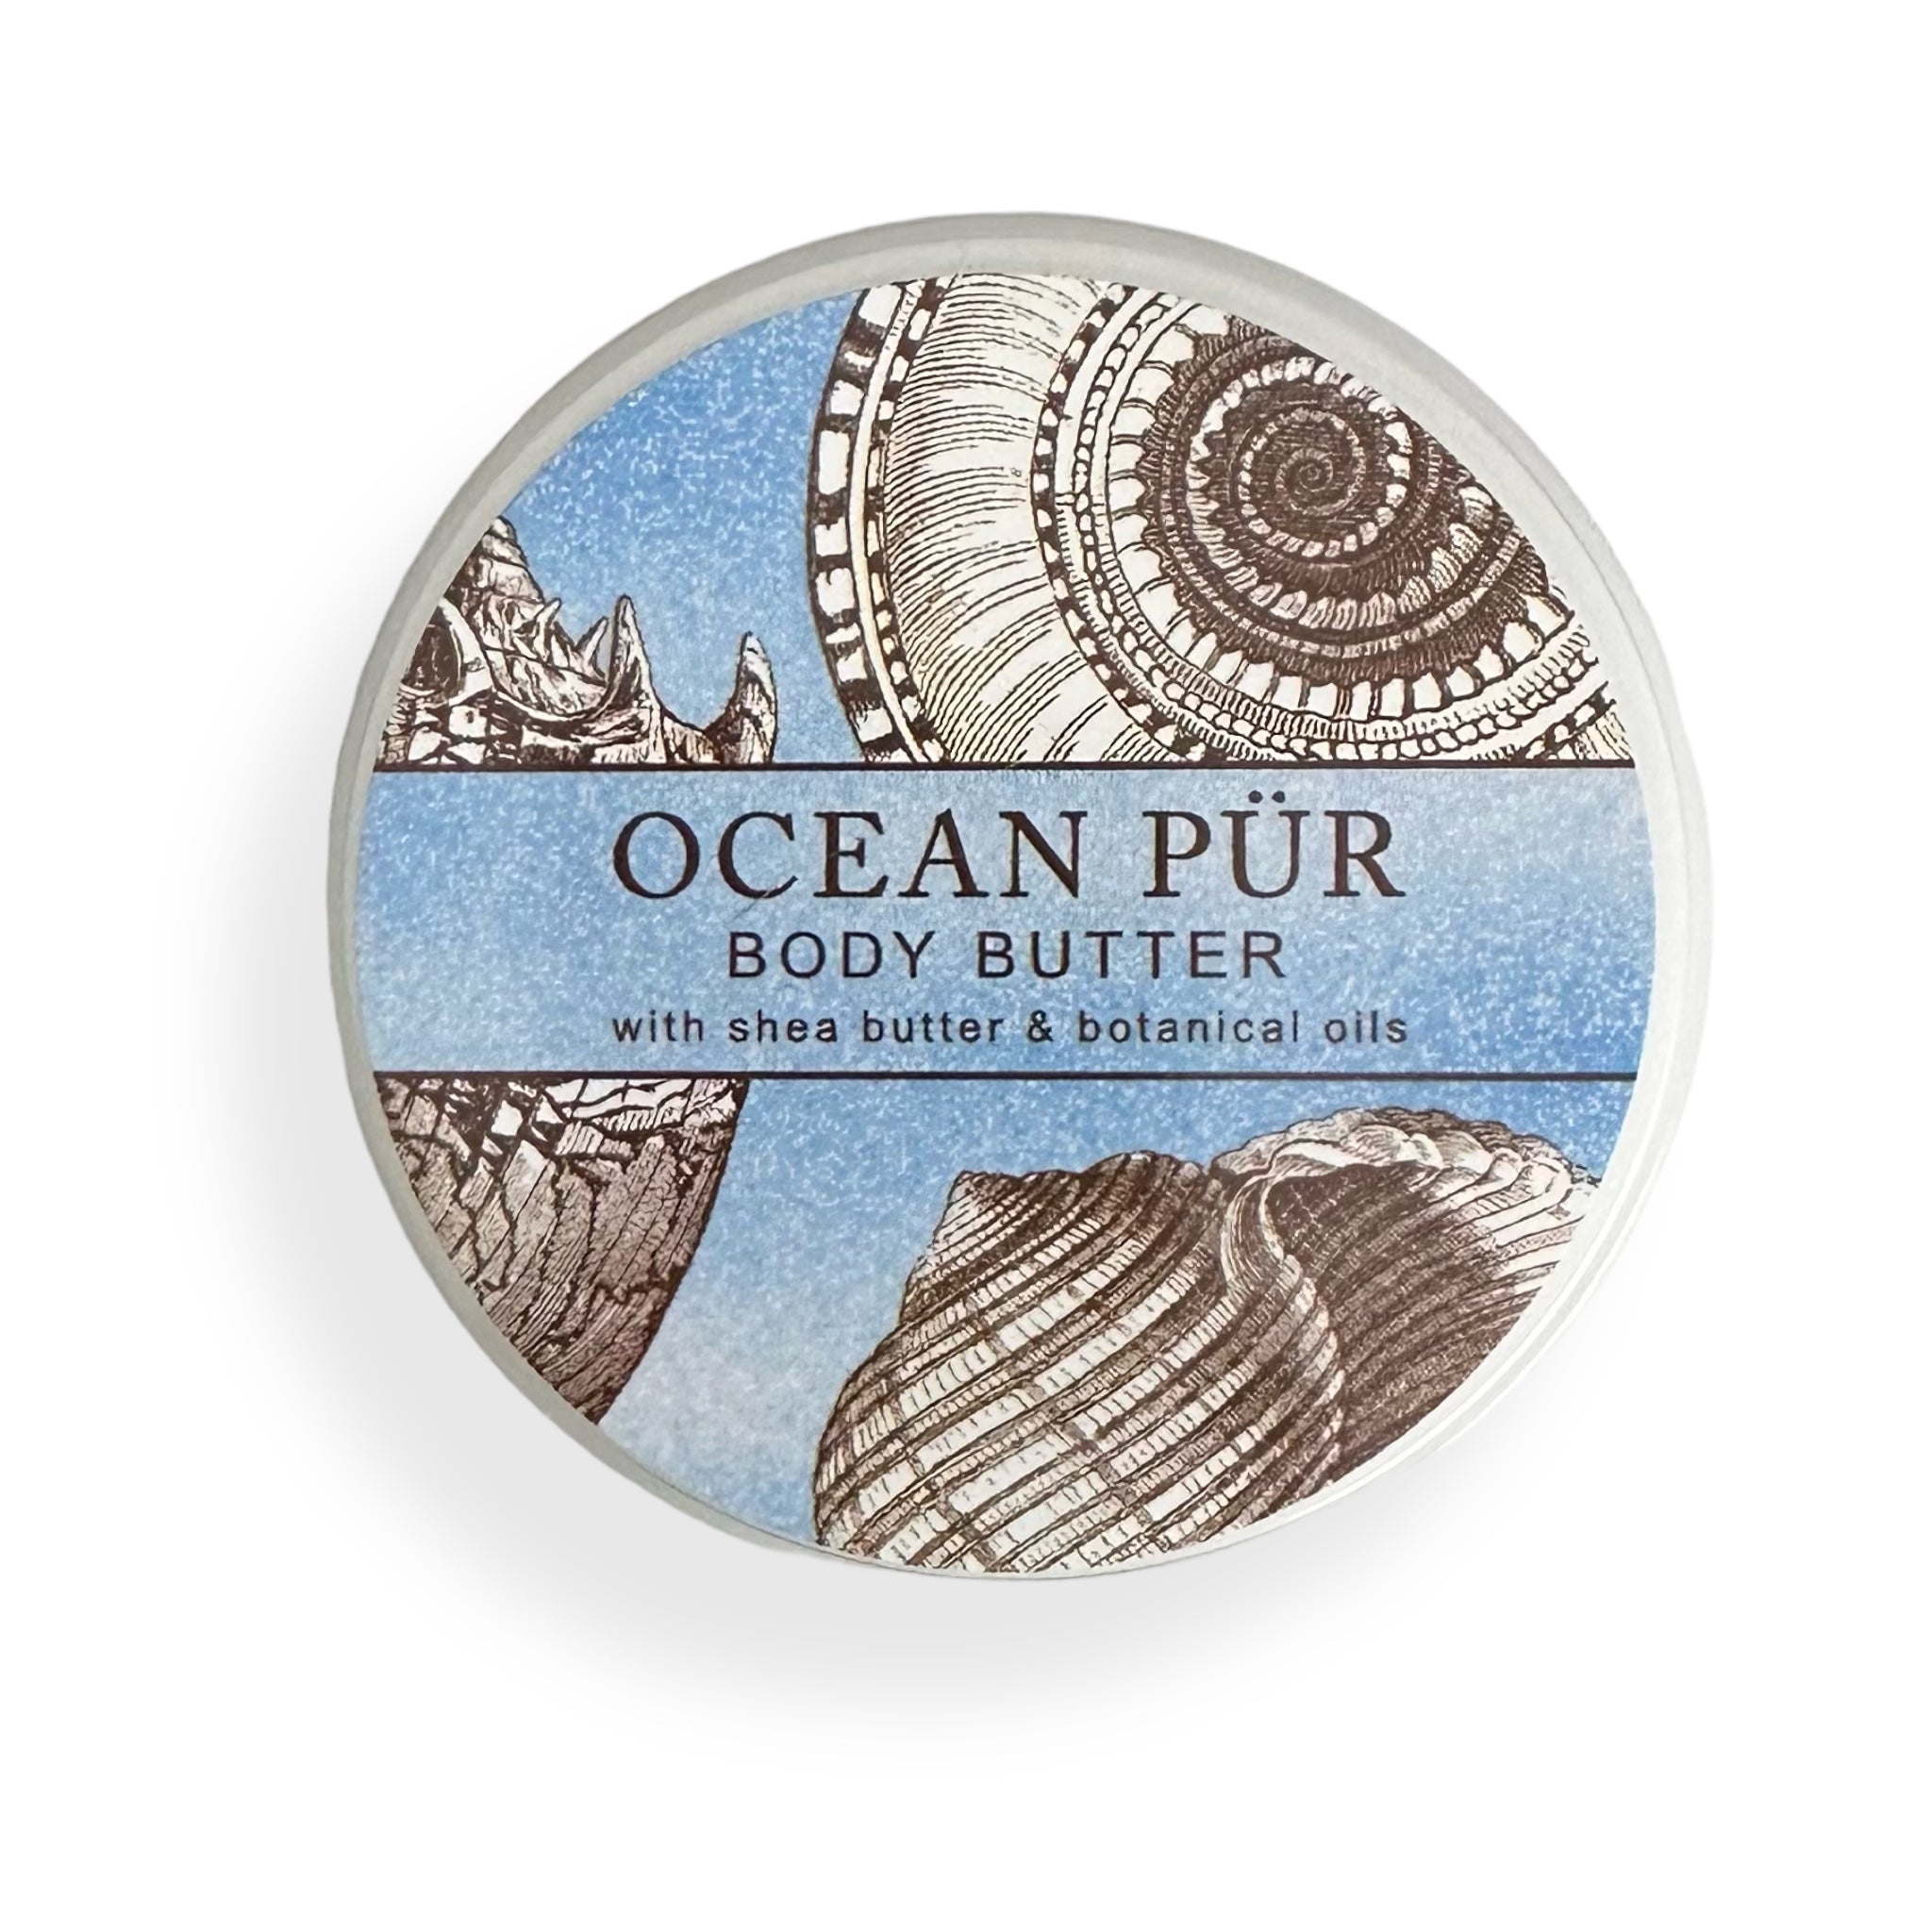 Greenwich Bay Trading Company OCEAN PUR Body Butter